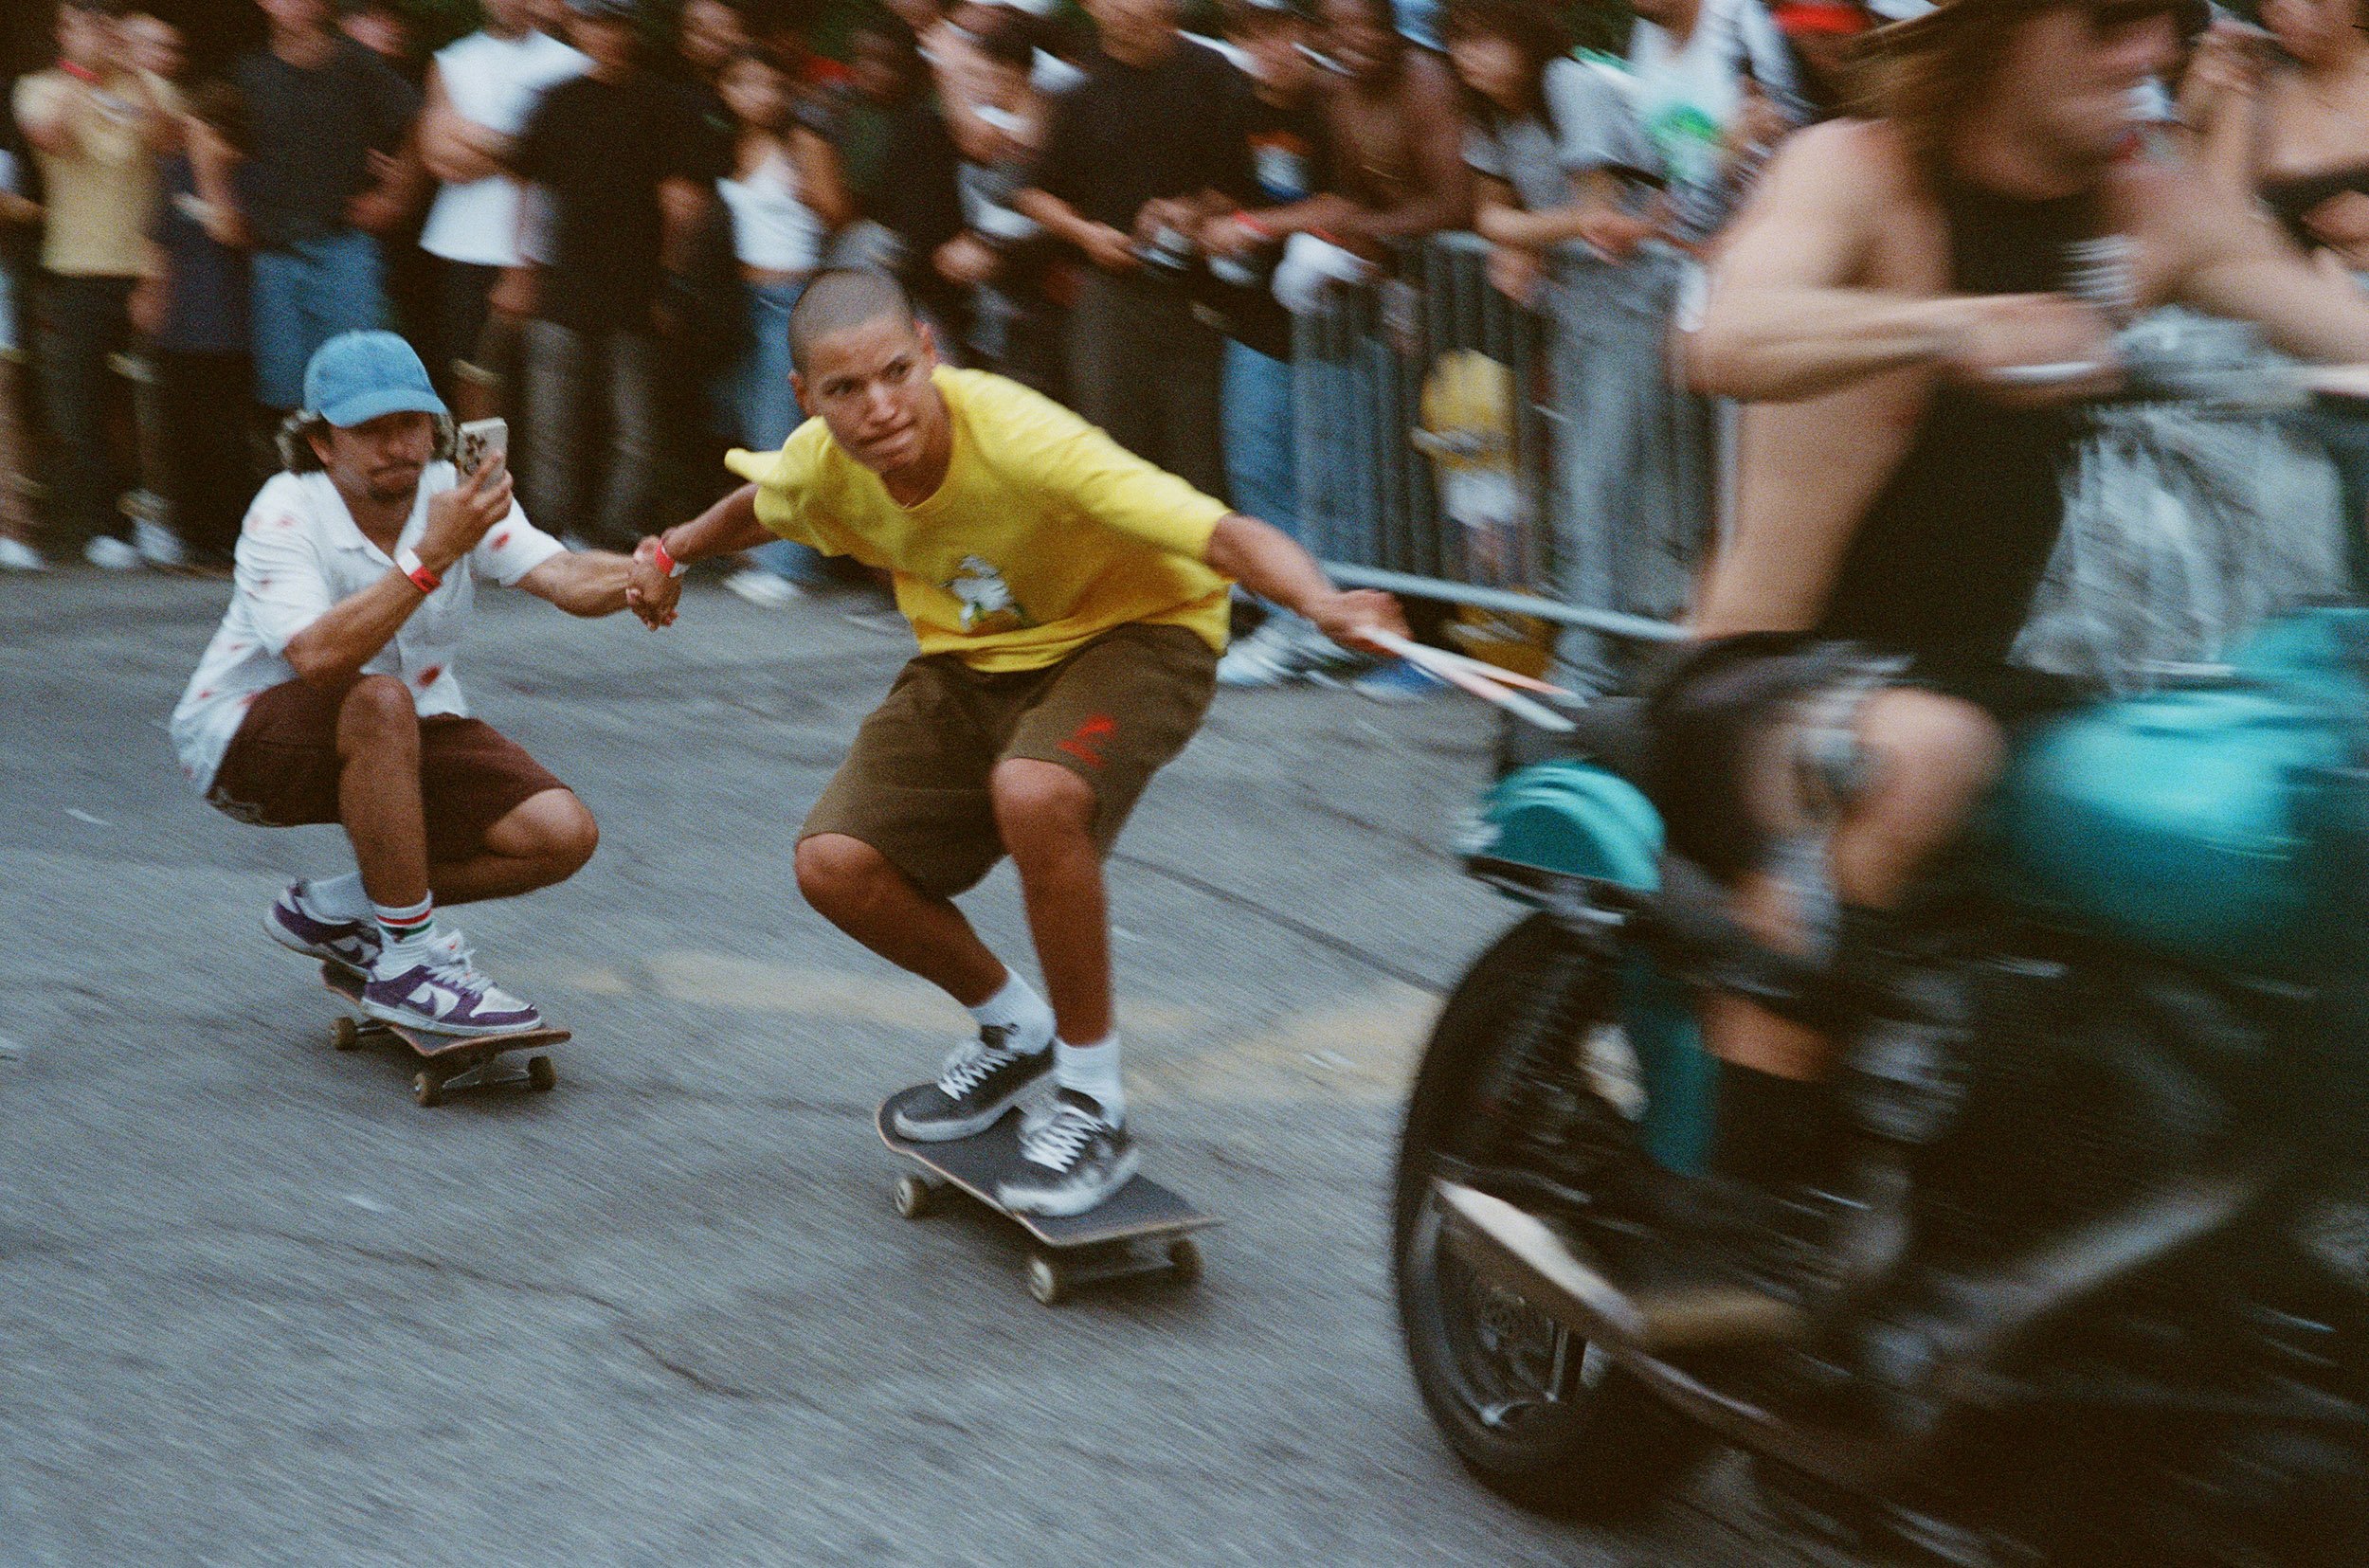 The First Annual Virgil Abloh Skating Invitational Was Joyous